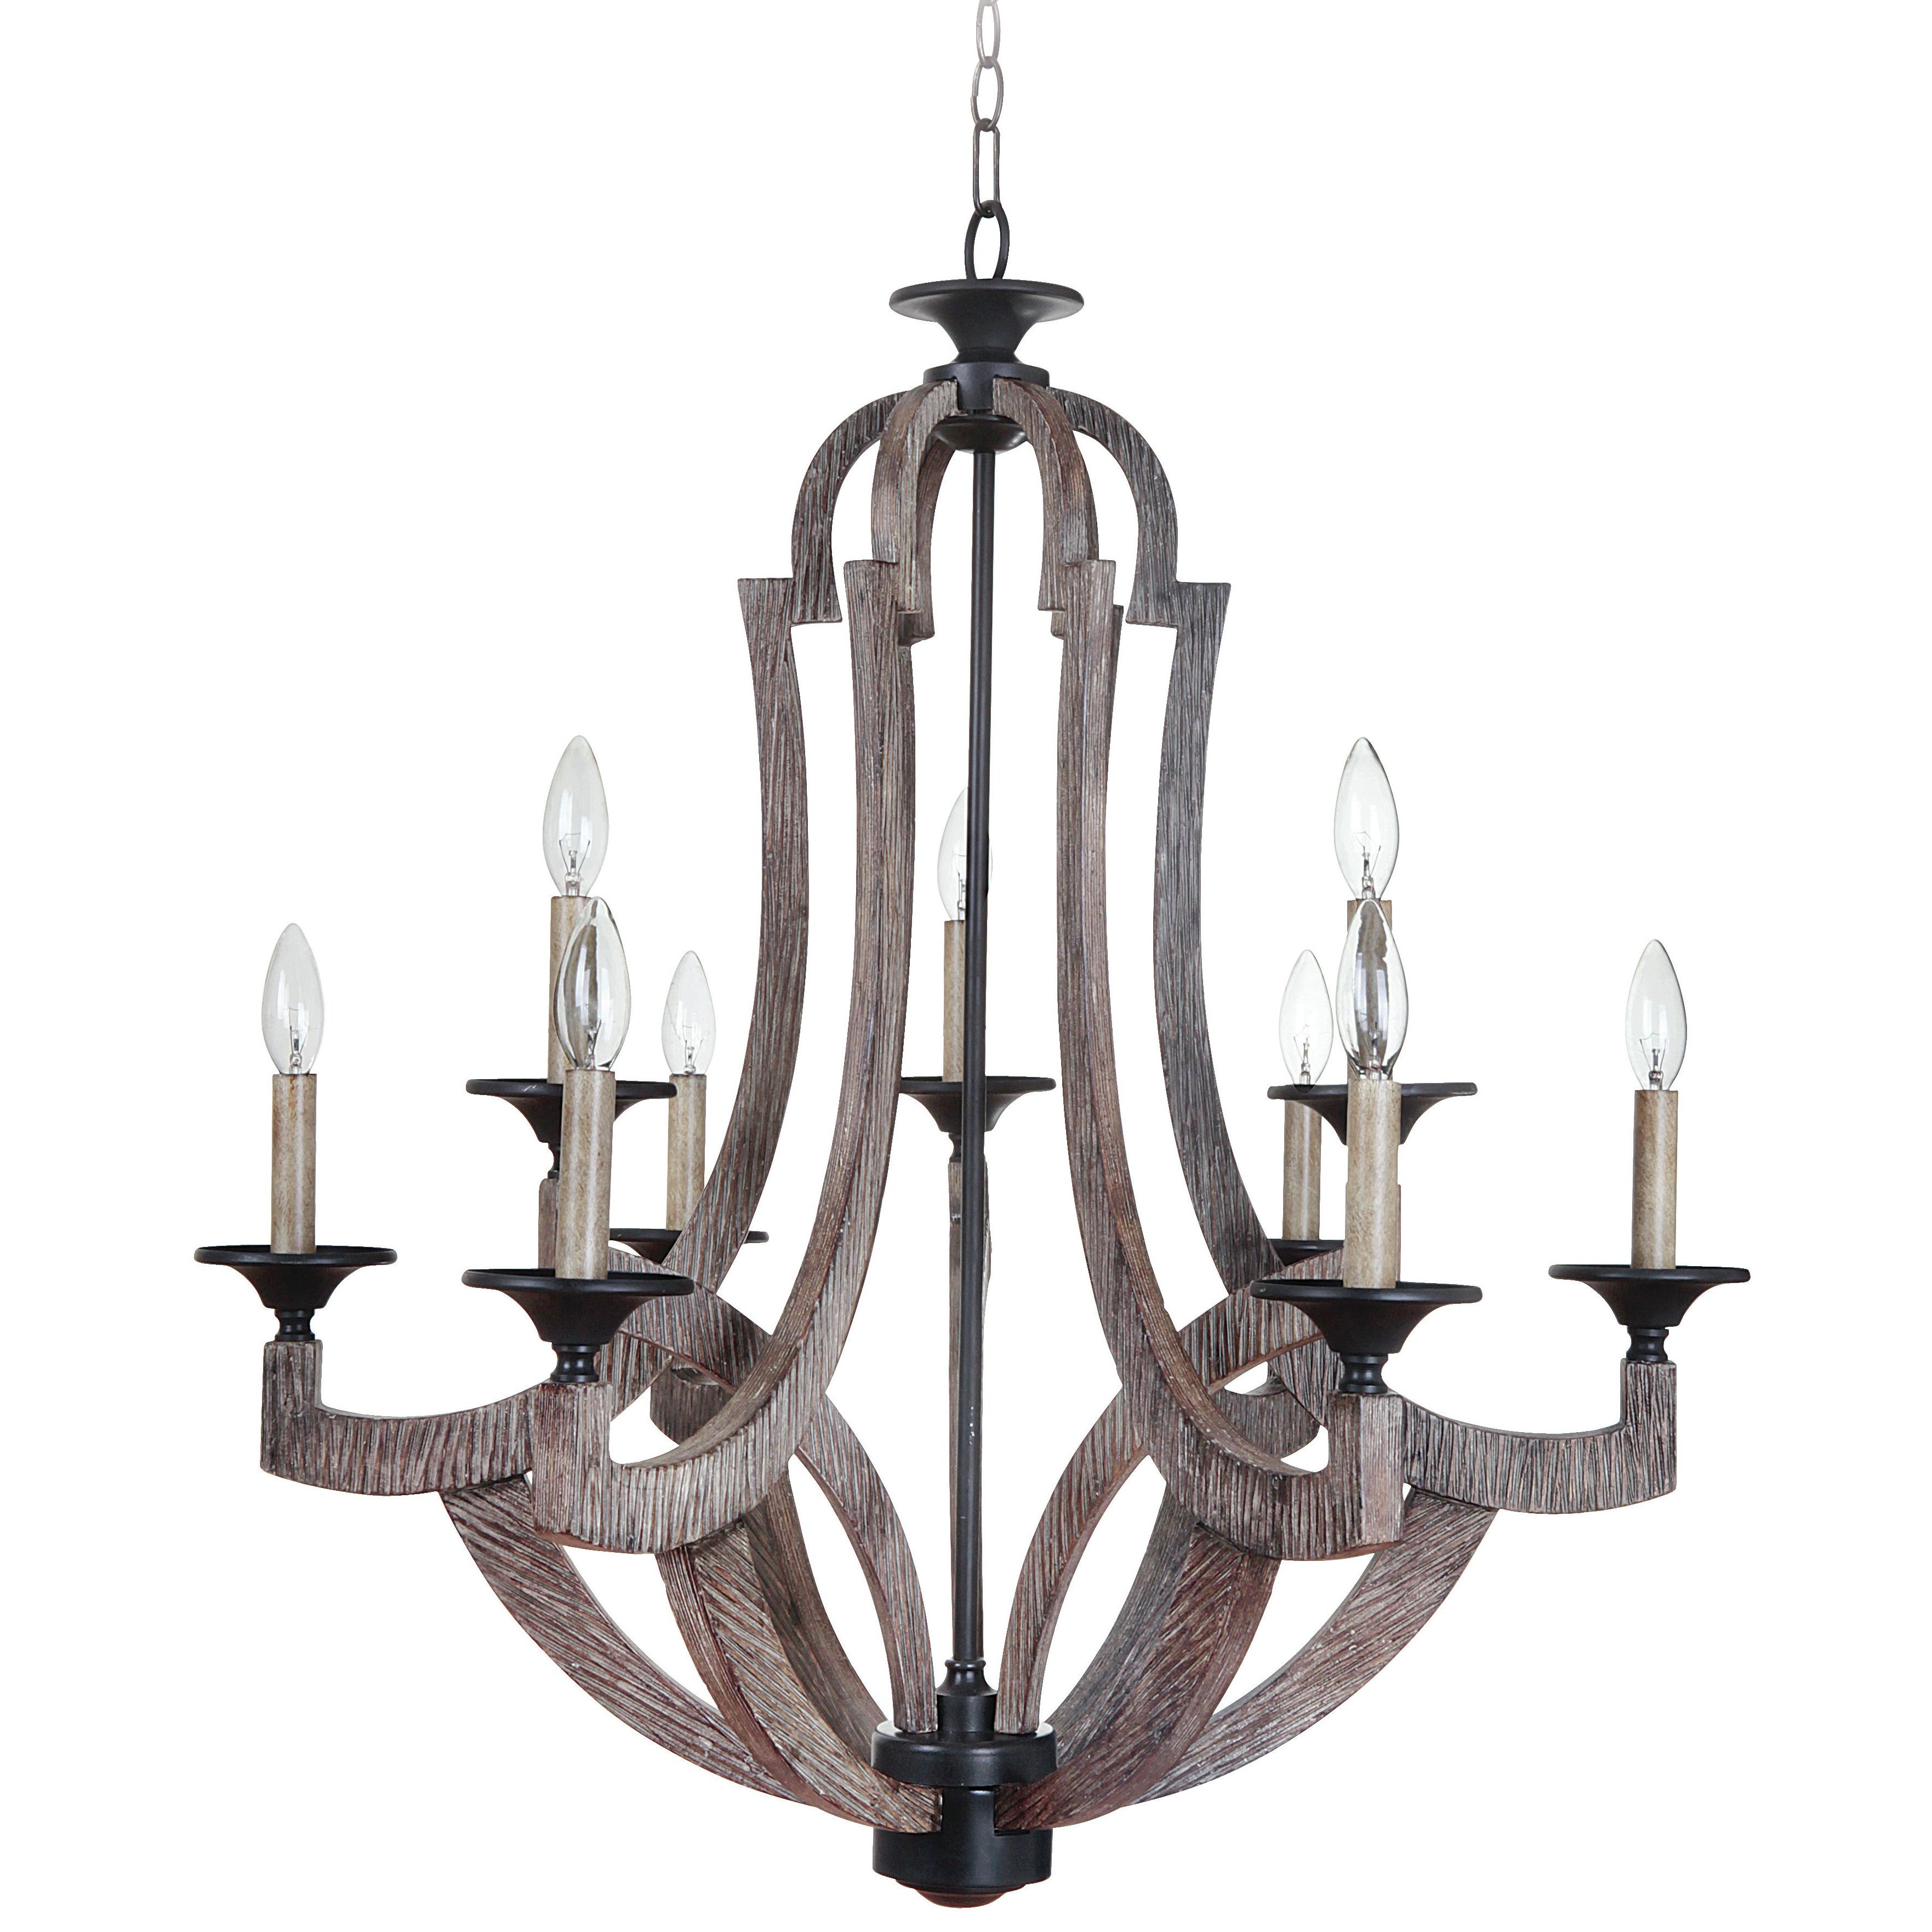 Fashionable Camilla 9 Light Candle Style Chandeliers Within Biddlesden 9 Light Candle Style Chandelier (View 5 of 20)